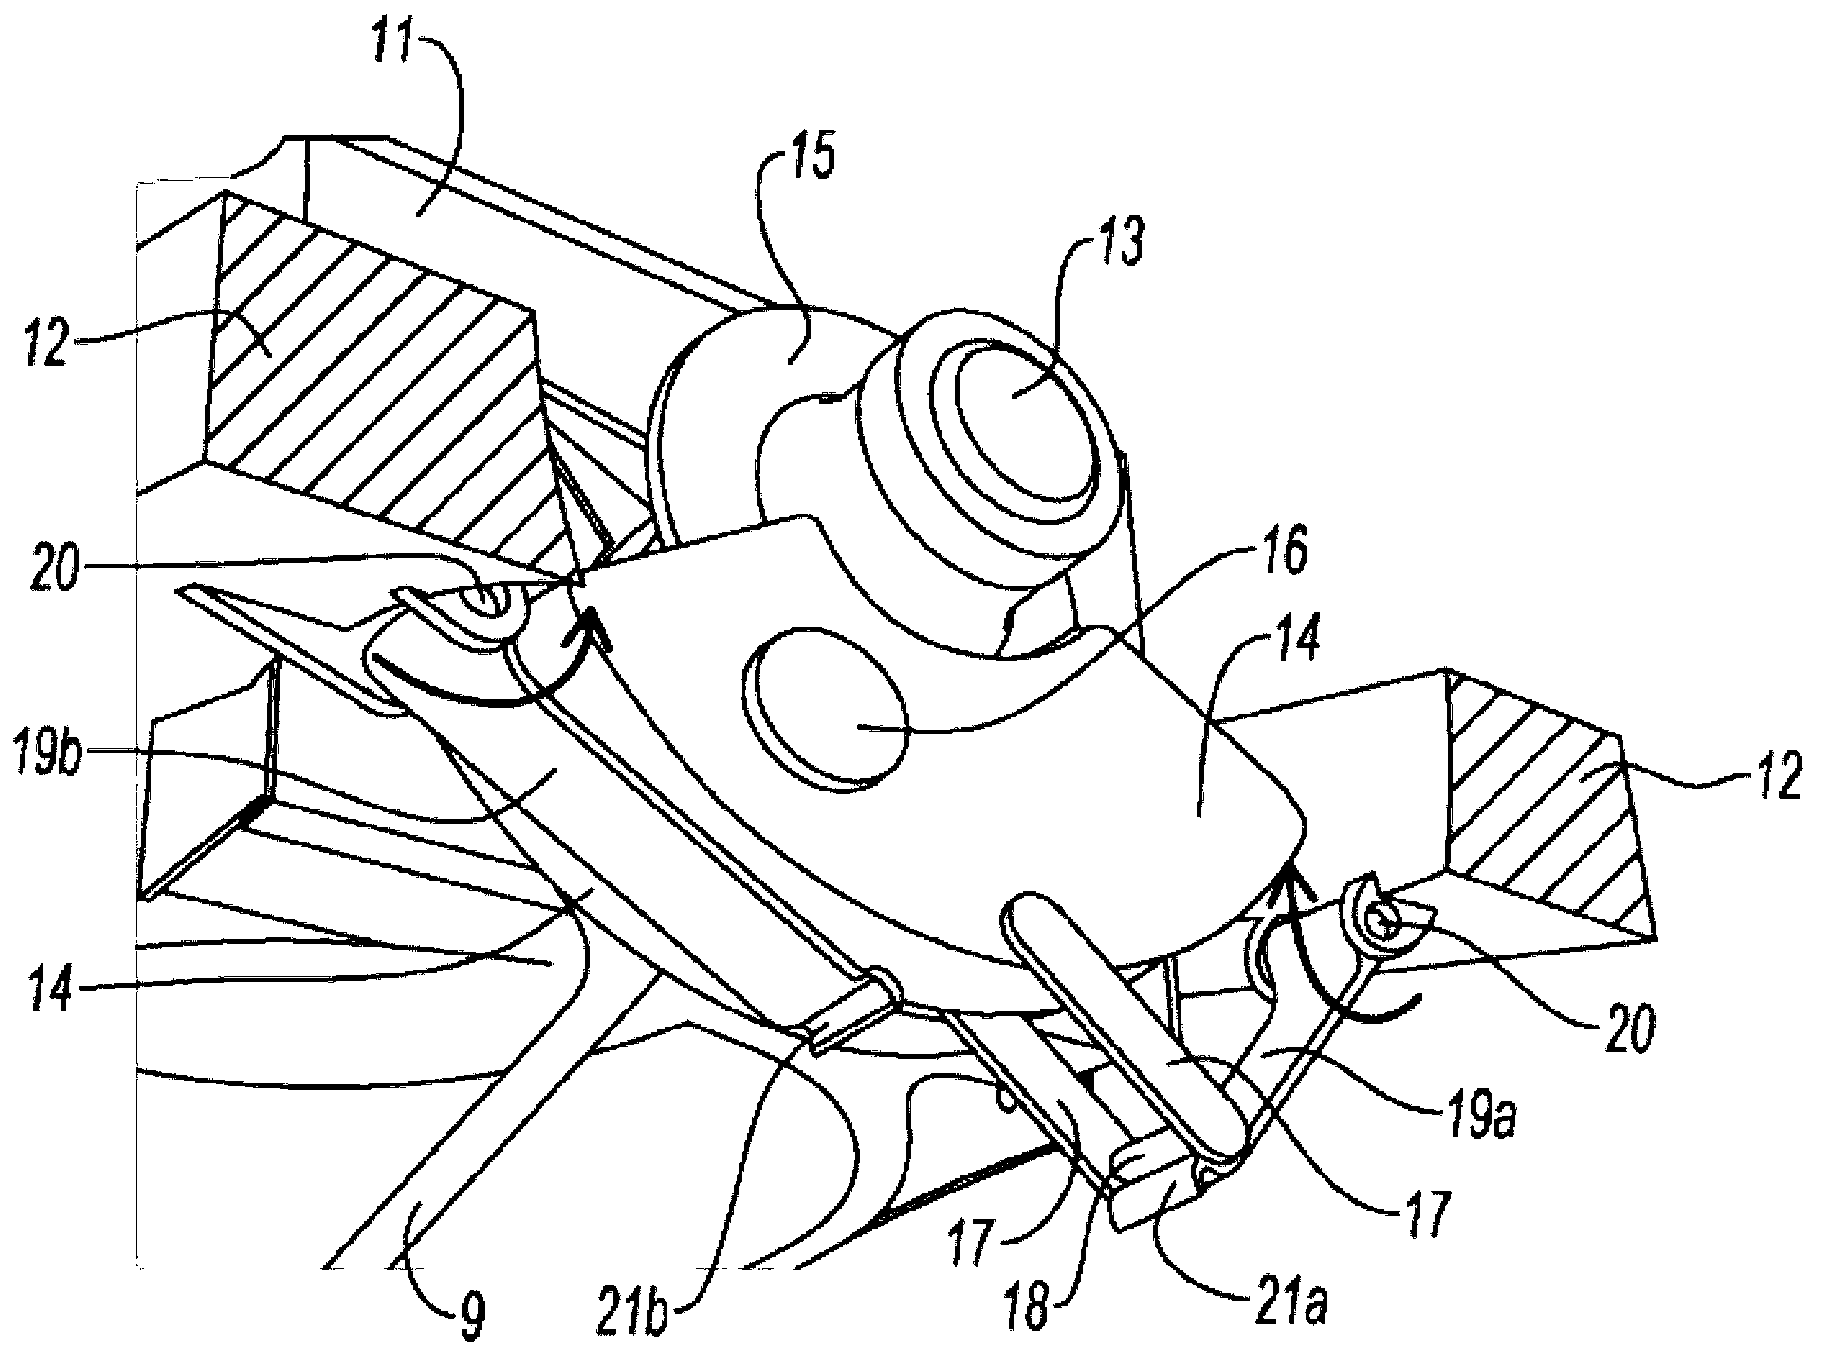 Device for shifting a propeller into reverse, comprising an actuator acting on a crank pin